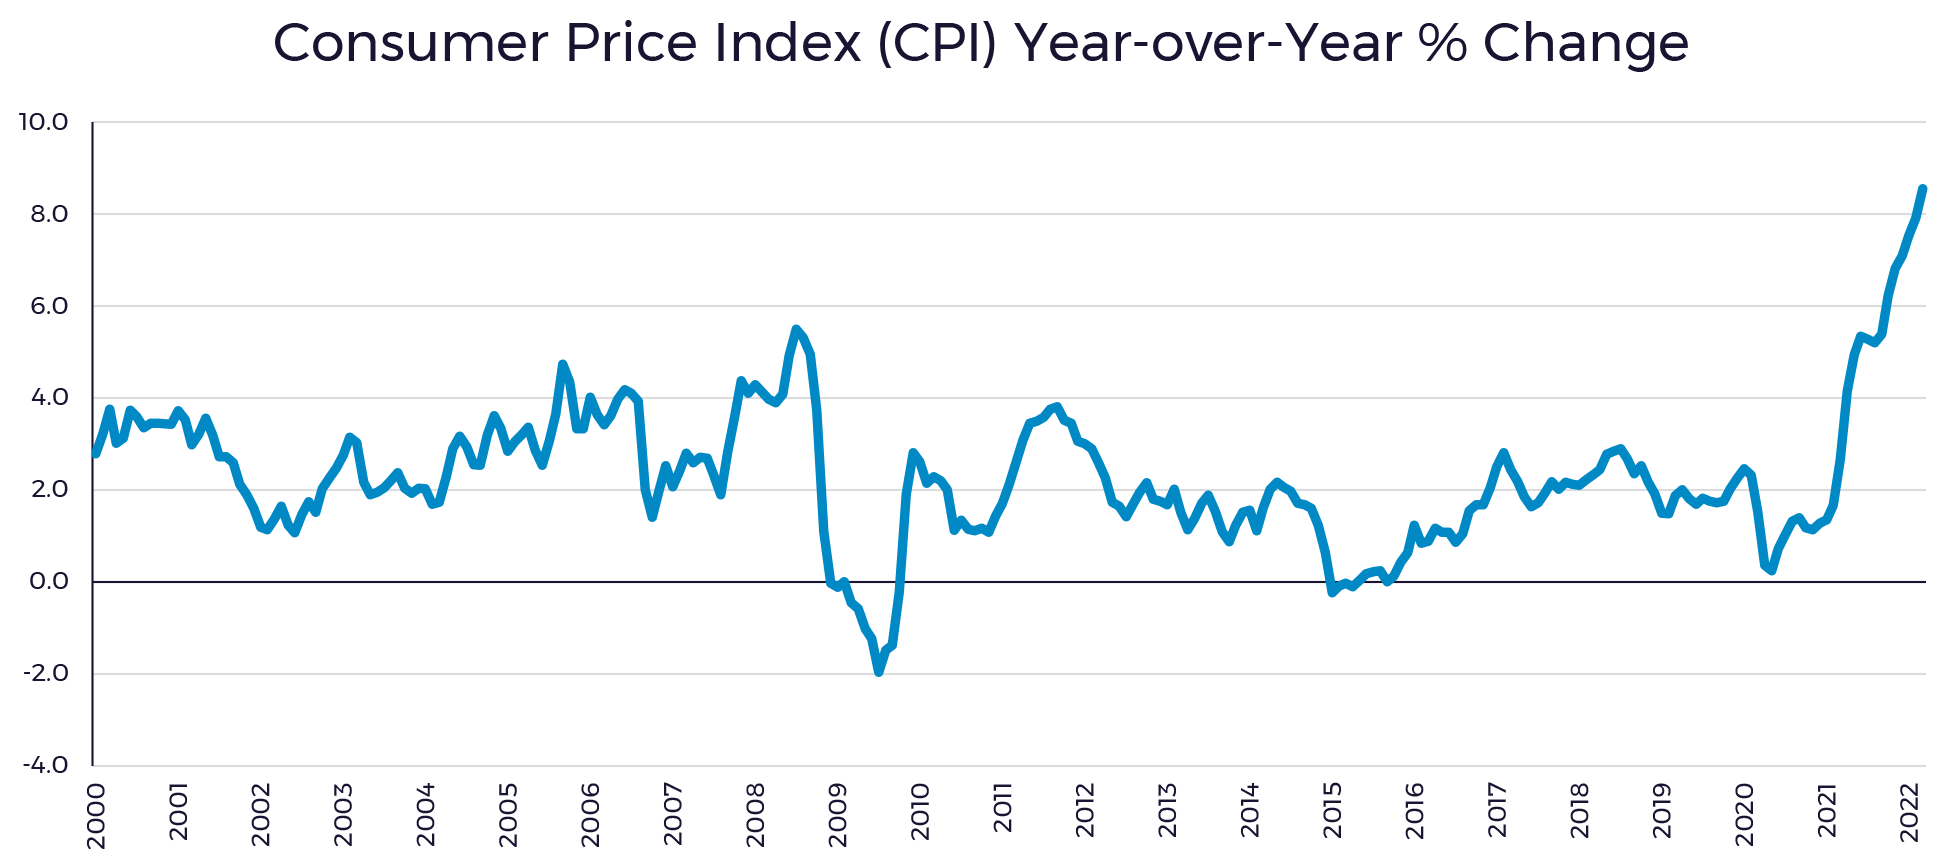 Consumer Price Index Year-over-Year Percentage Change